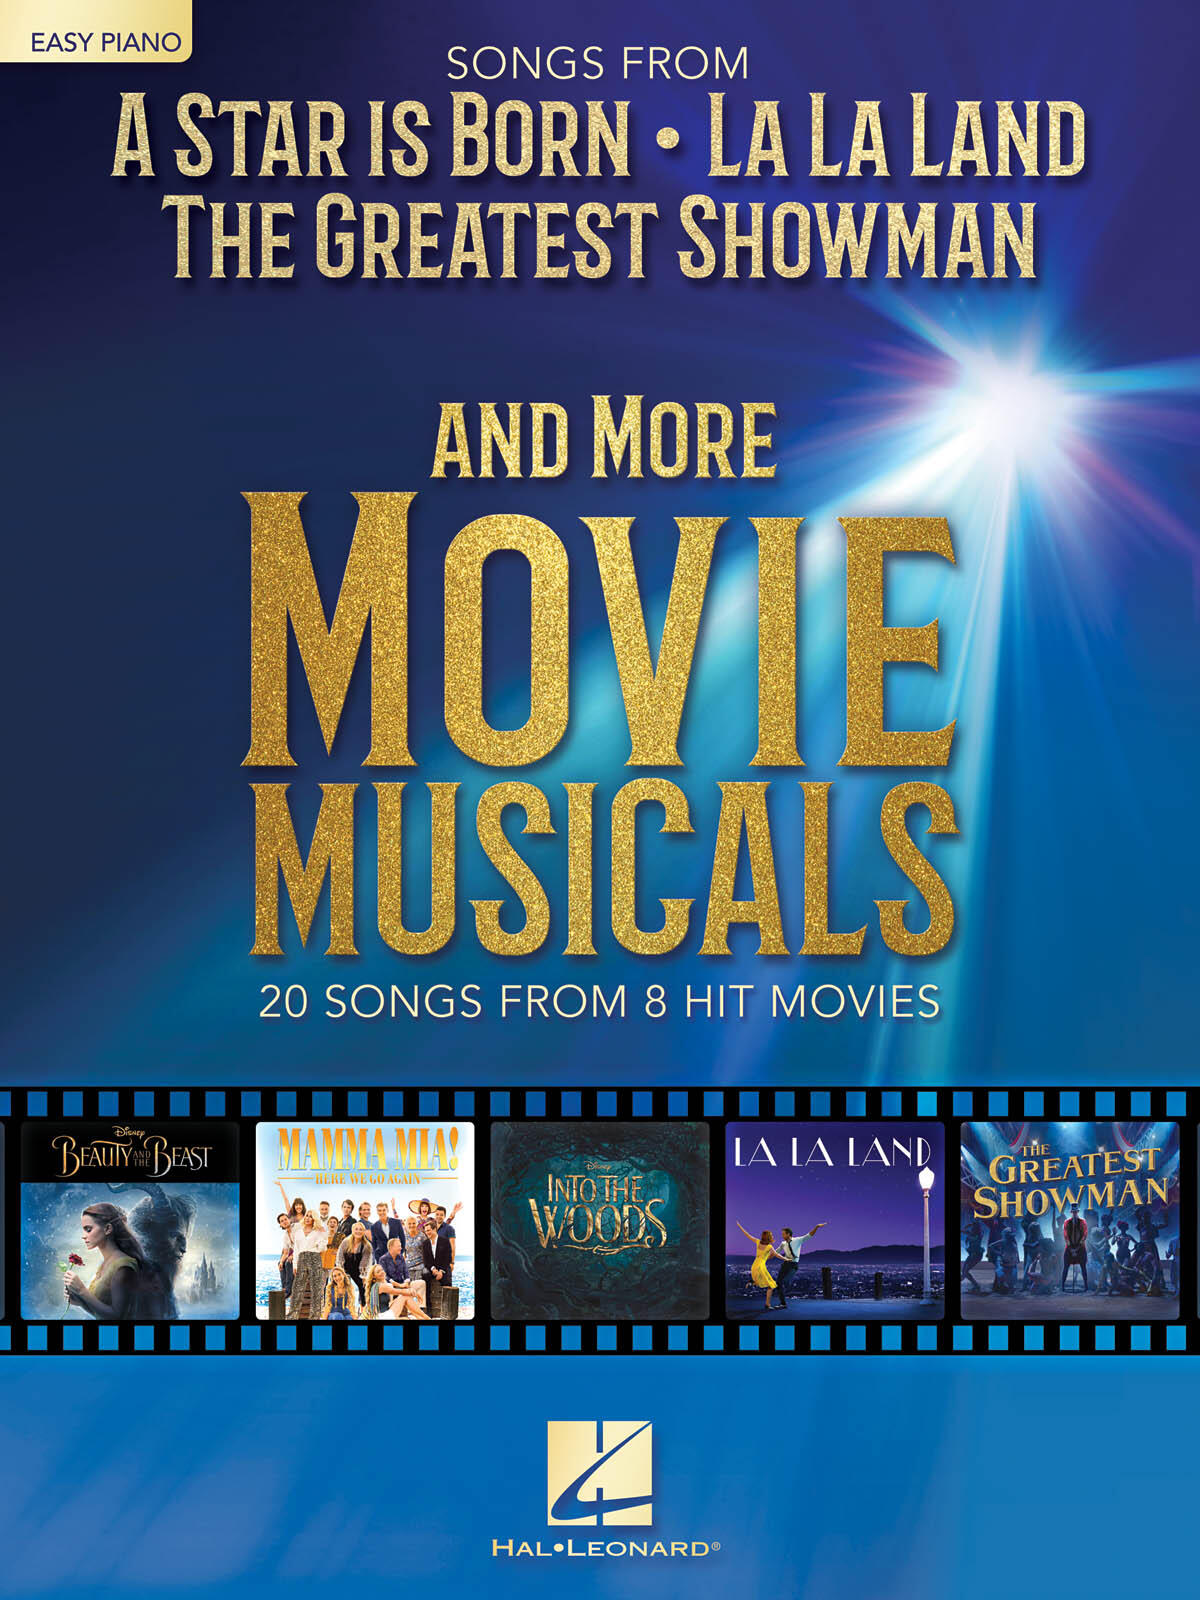 Songs from A Star Is Born and More Movie Musicals 20 songs from 7 hit movie musicals including A Star Is Born, The Greatest Showman, La La Land & more Lukas Nelson  Easy Piano Buch TV, Film, Musical und Show HL00287577 (HL00287577) : photo 1